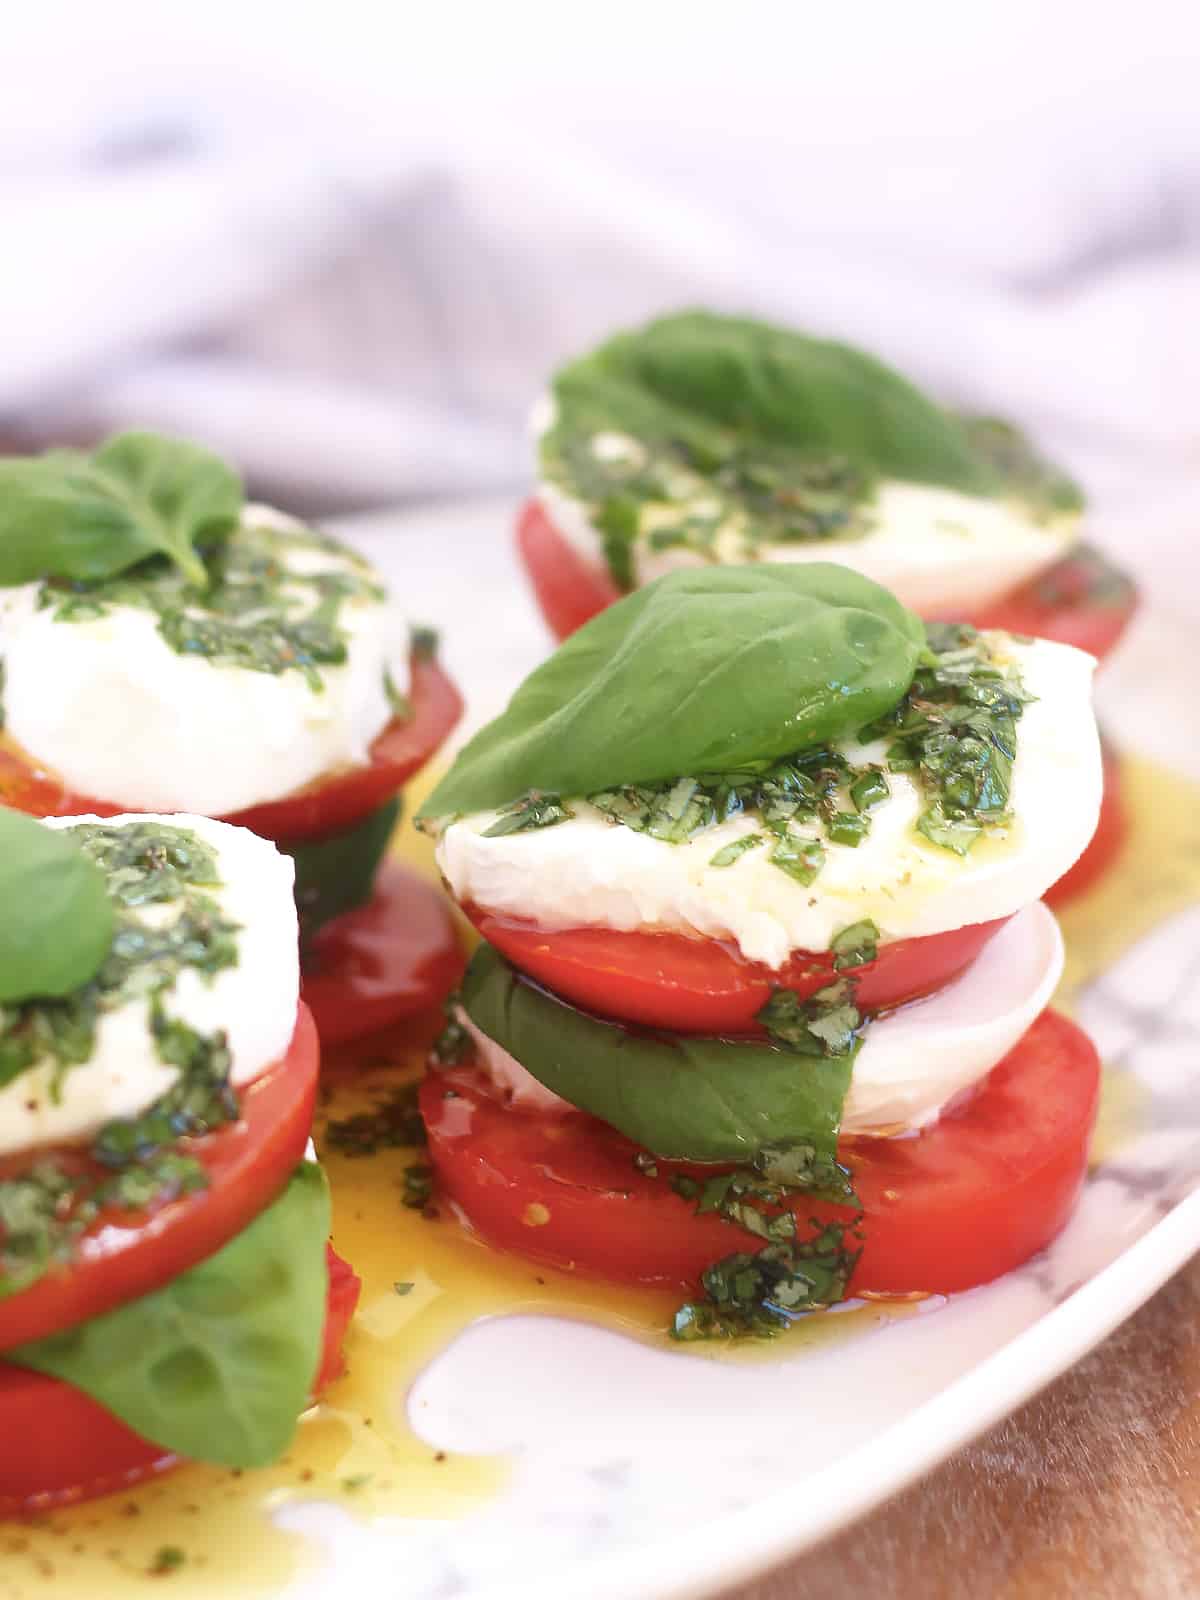 Caprese salad stacks drizzled with basil olive oil.